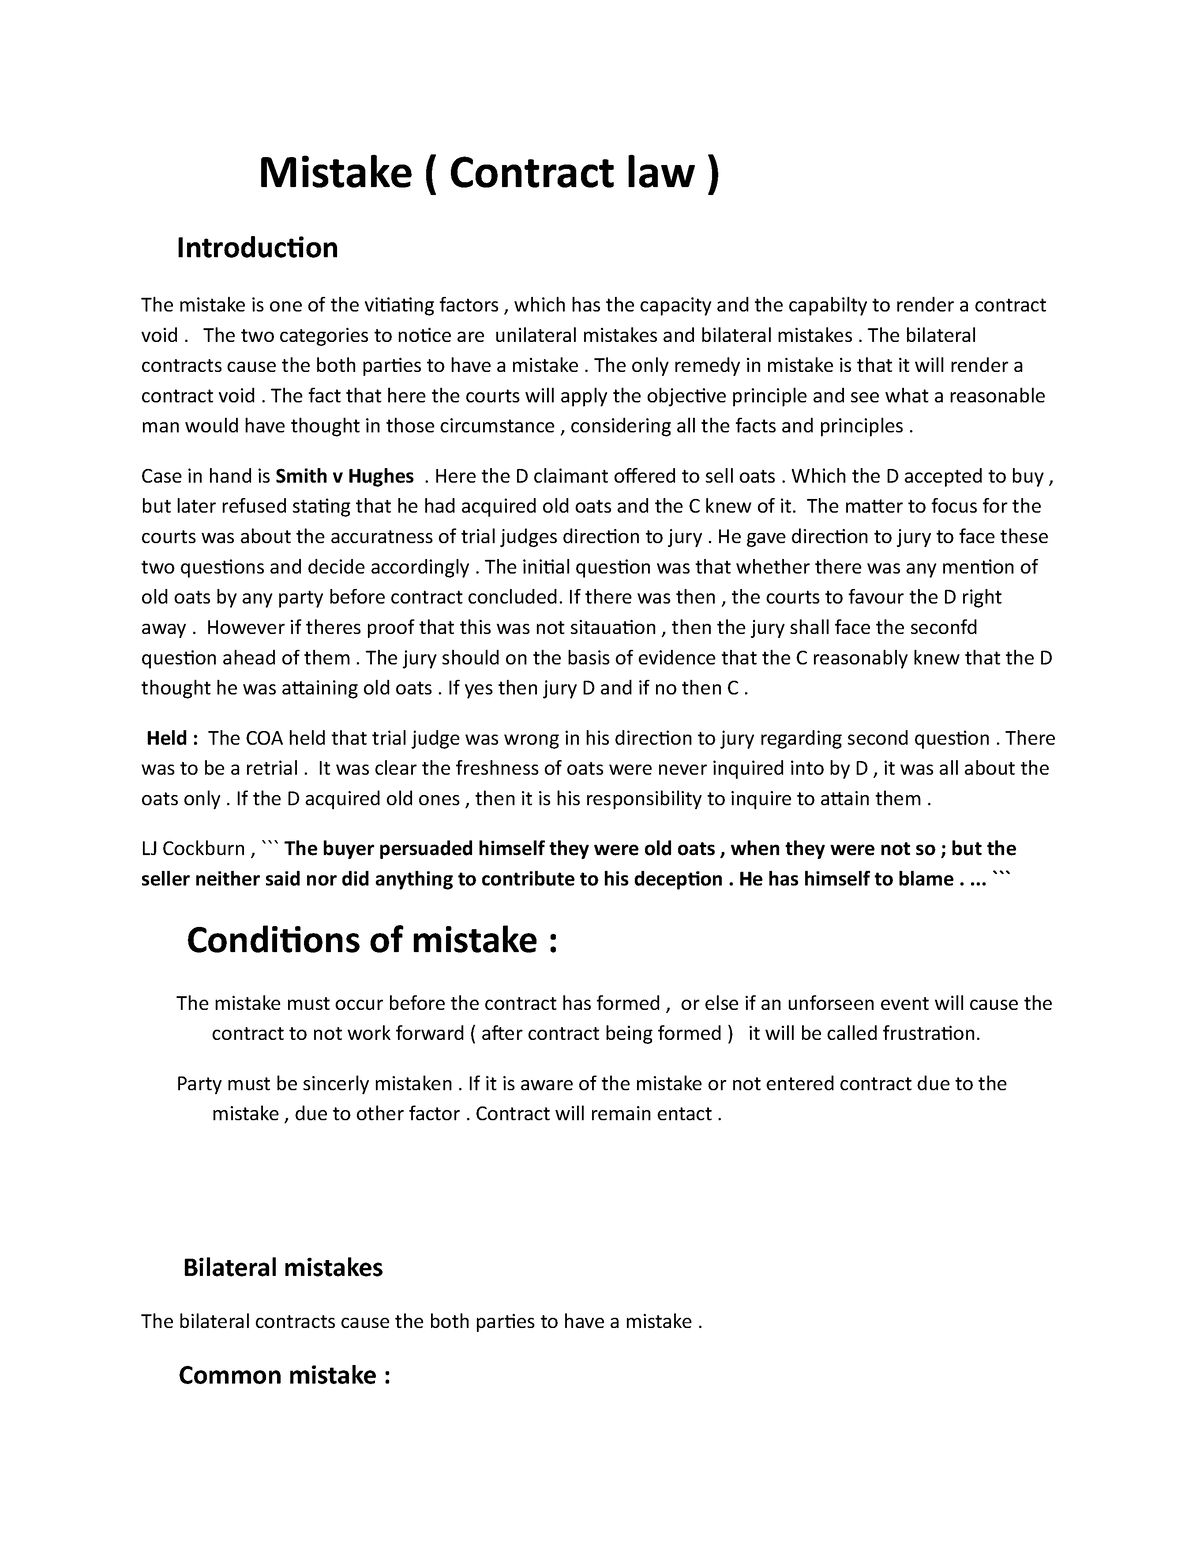 contract law mistake essay